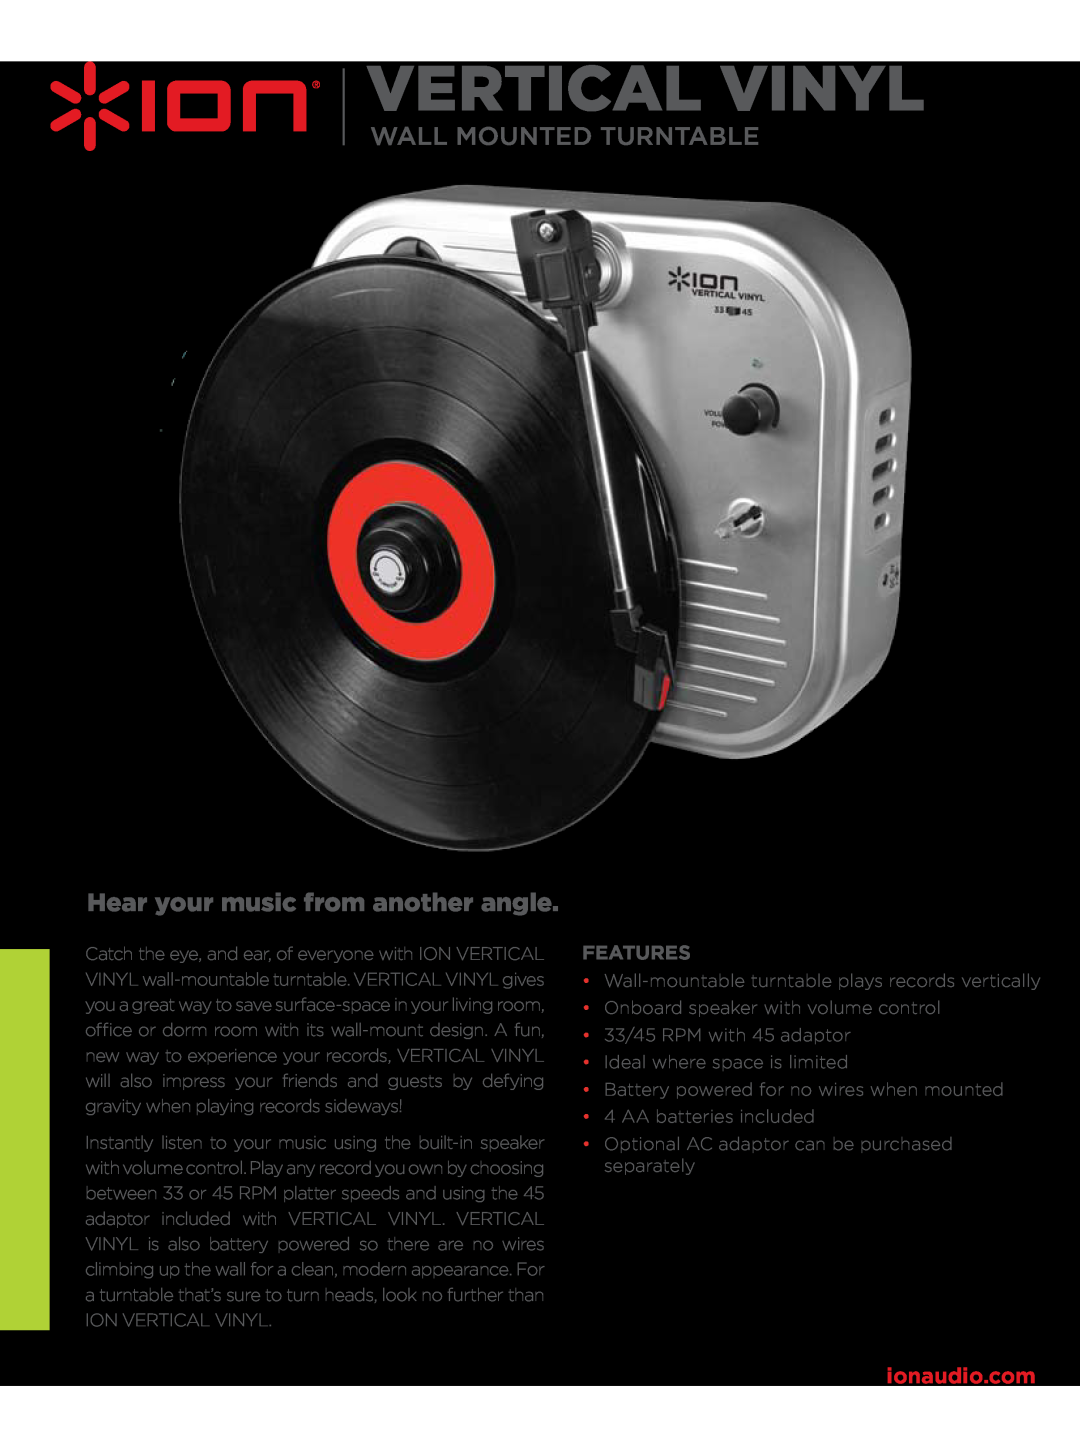 ION VERTICAL VINYL specifications Vertical Vinyl, Wall Mounted Turntable, Hear your music from another angle, Features 